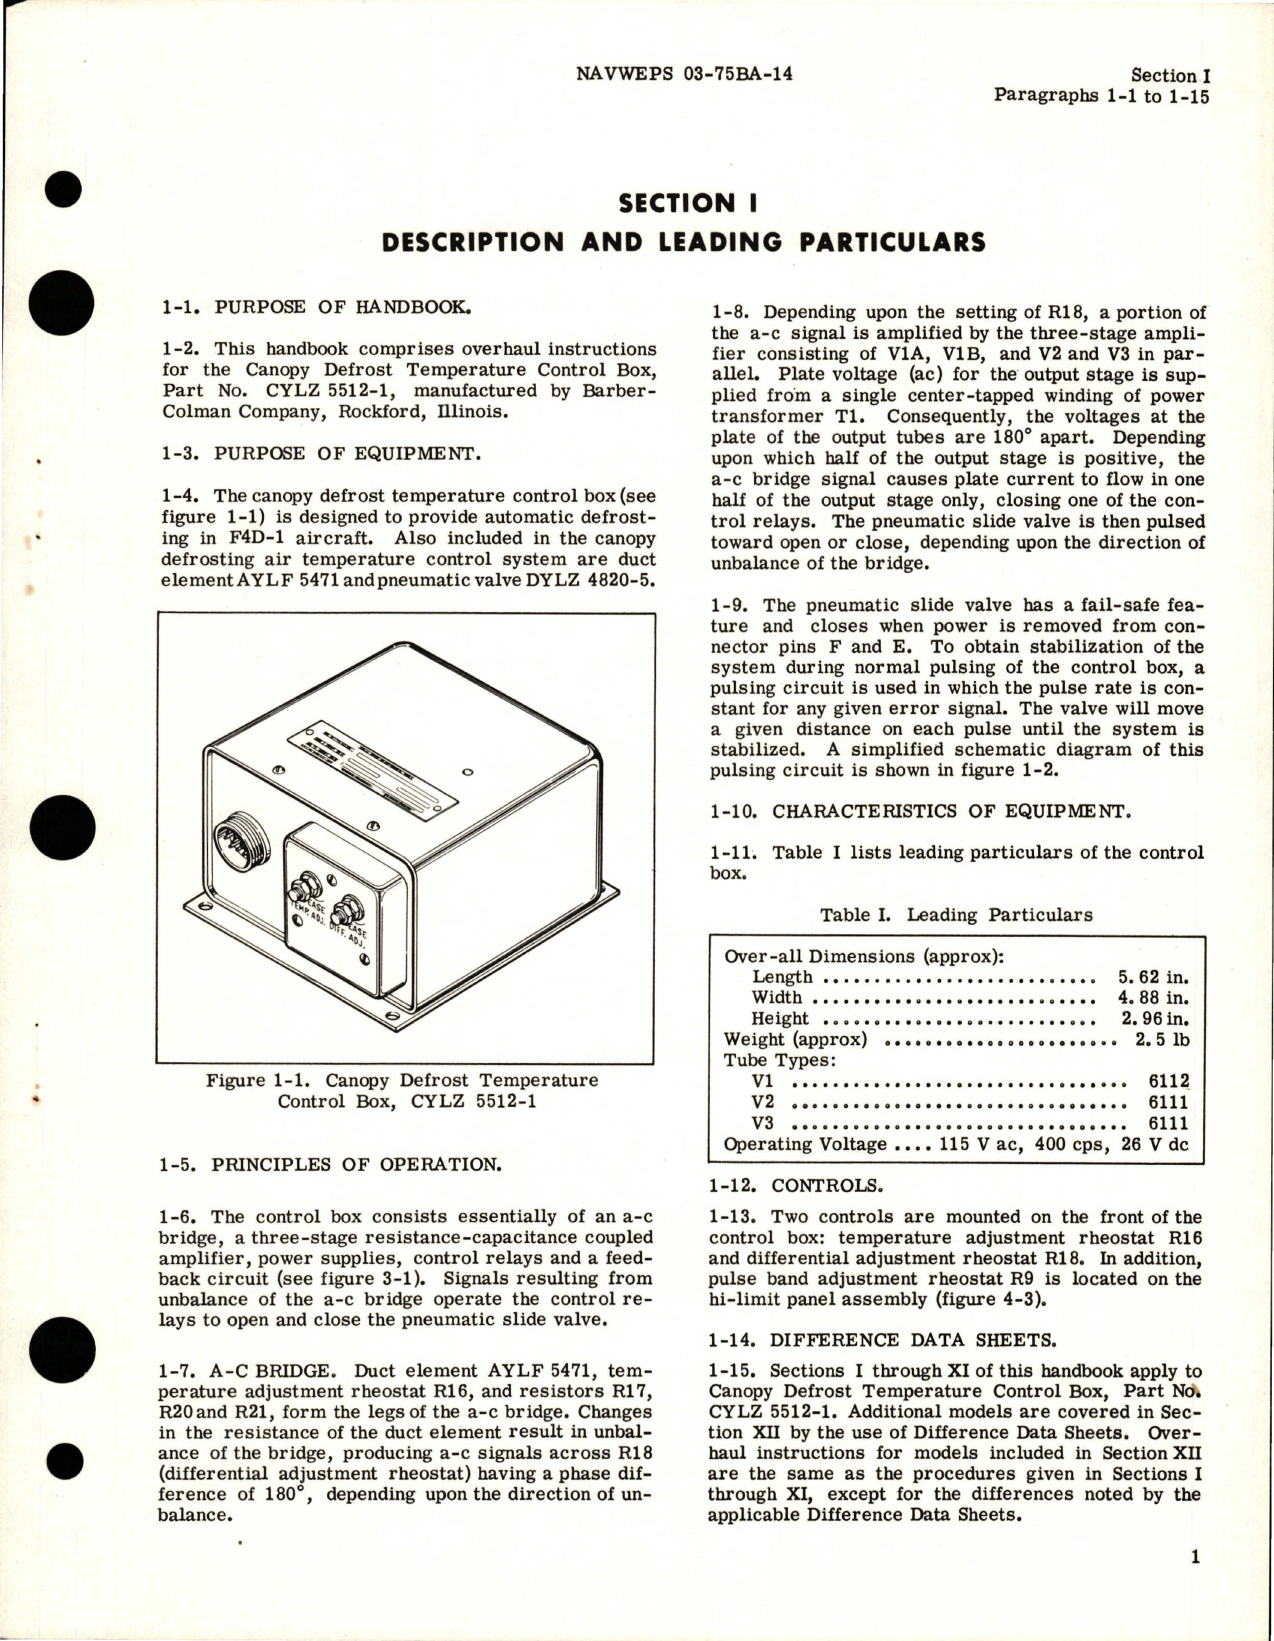 Sample page 5 from AirCorps Library document: Overhaul Instructions for Control Box Canopy Defrost - Parts CYLZ 5512-1 and CYLZ 5512-2